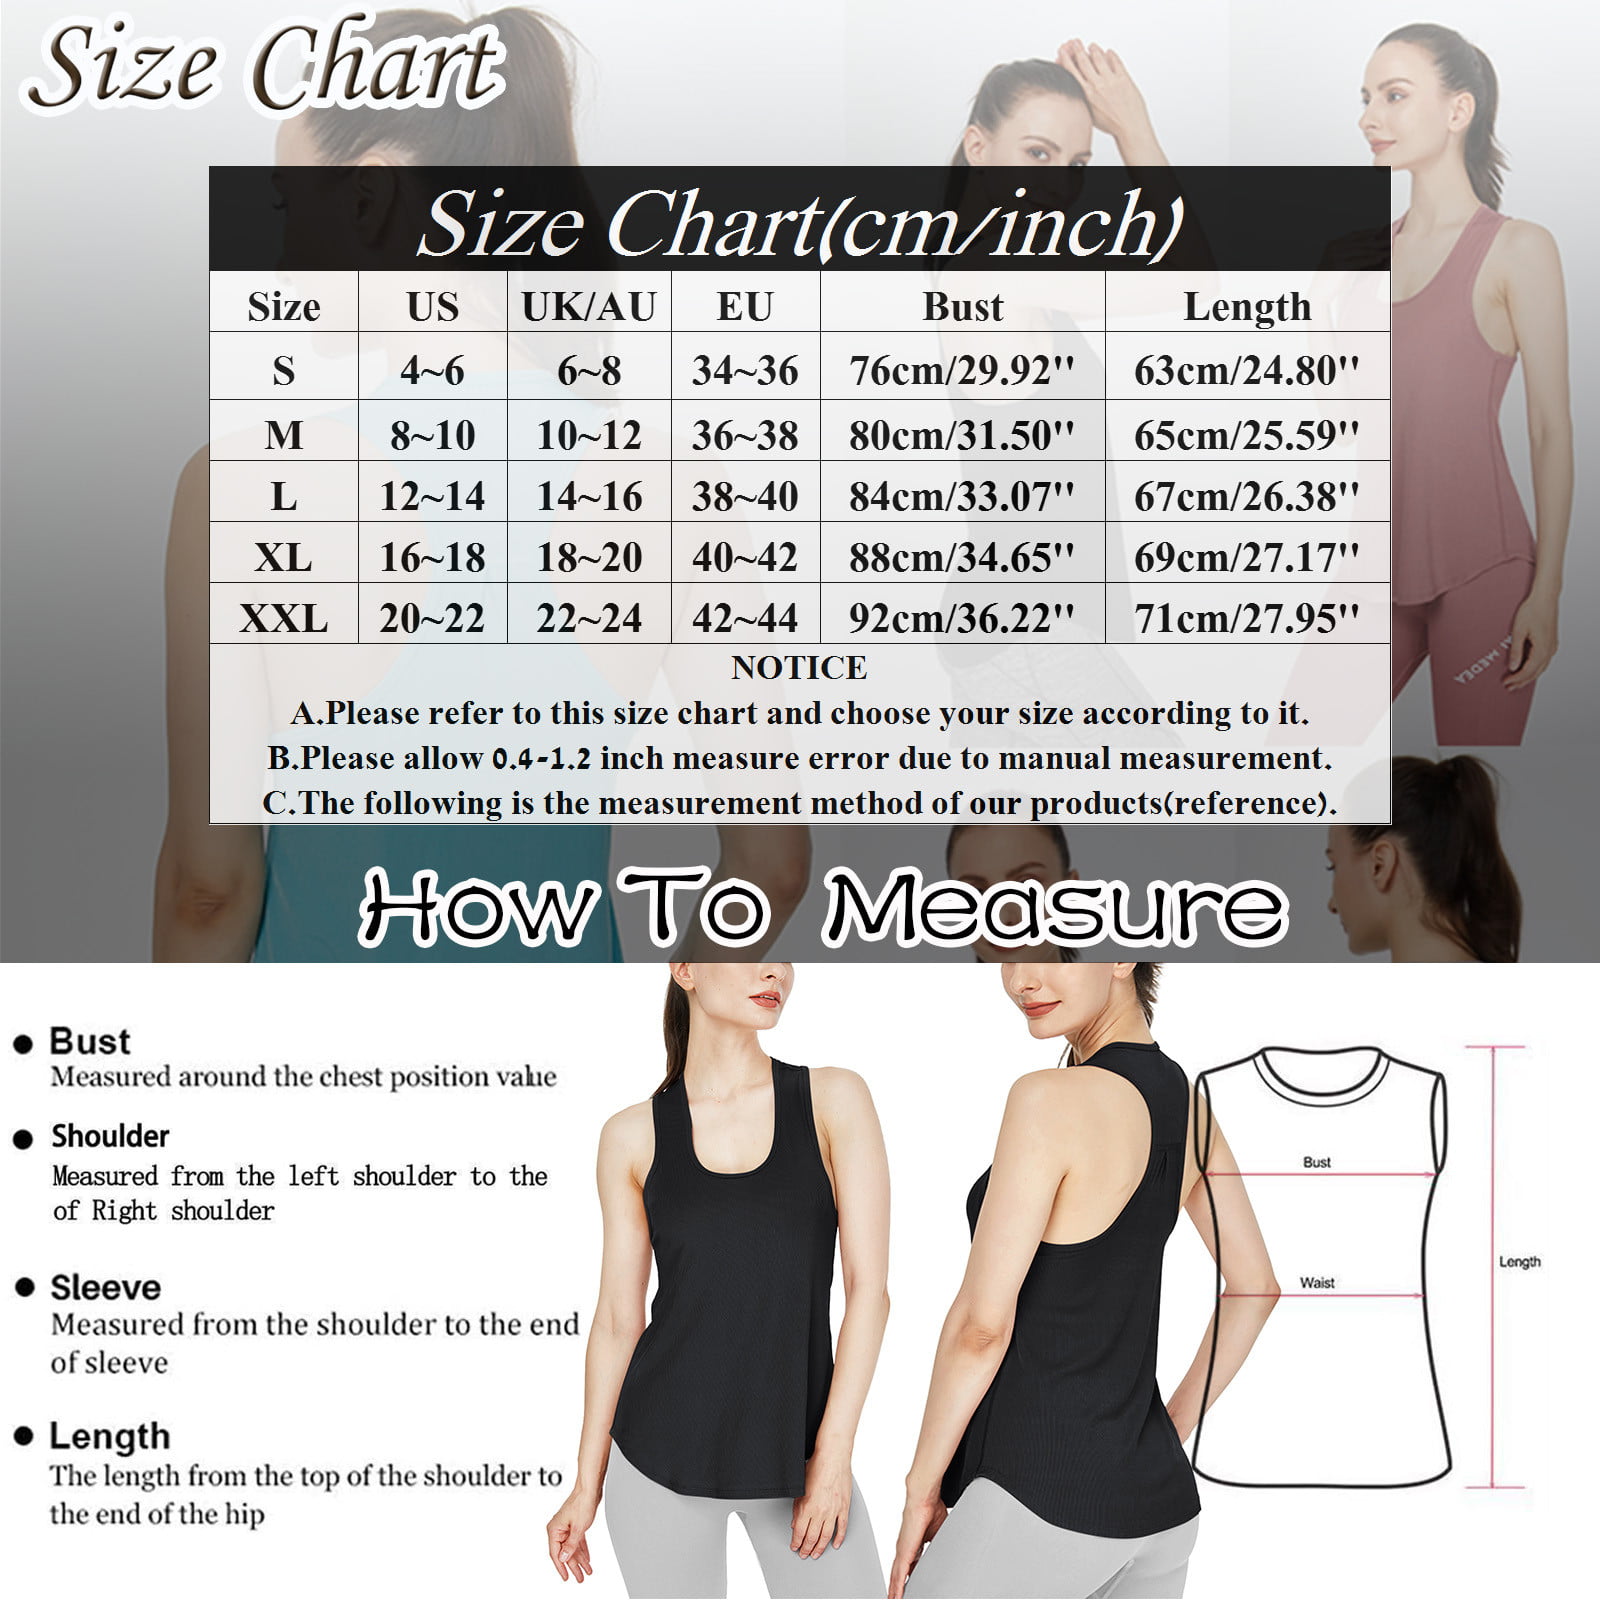 LBECLEY Lace Top Womens Girls Workout Yoga Tops Soft Sleeveless Tank Tops  Sleeveless Activewear Tank Tops Cropped Padded Tops for Women Xxl 